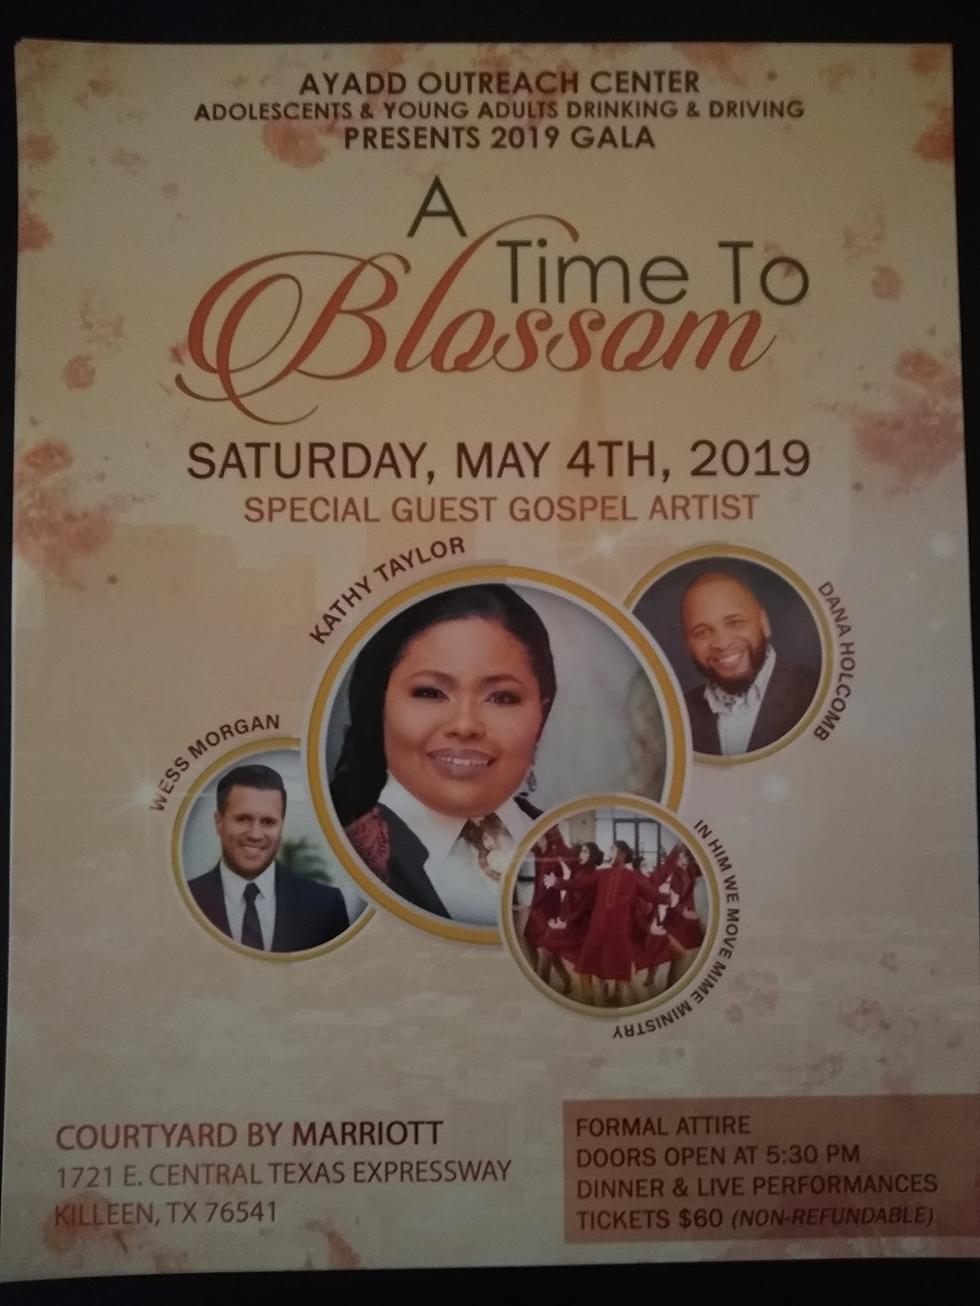 AYADD Outreach 2019 Gala Featuring Gospel Stars This Saturday In Killeen